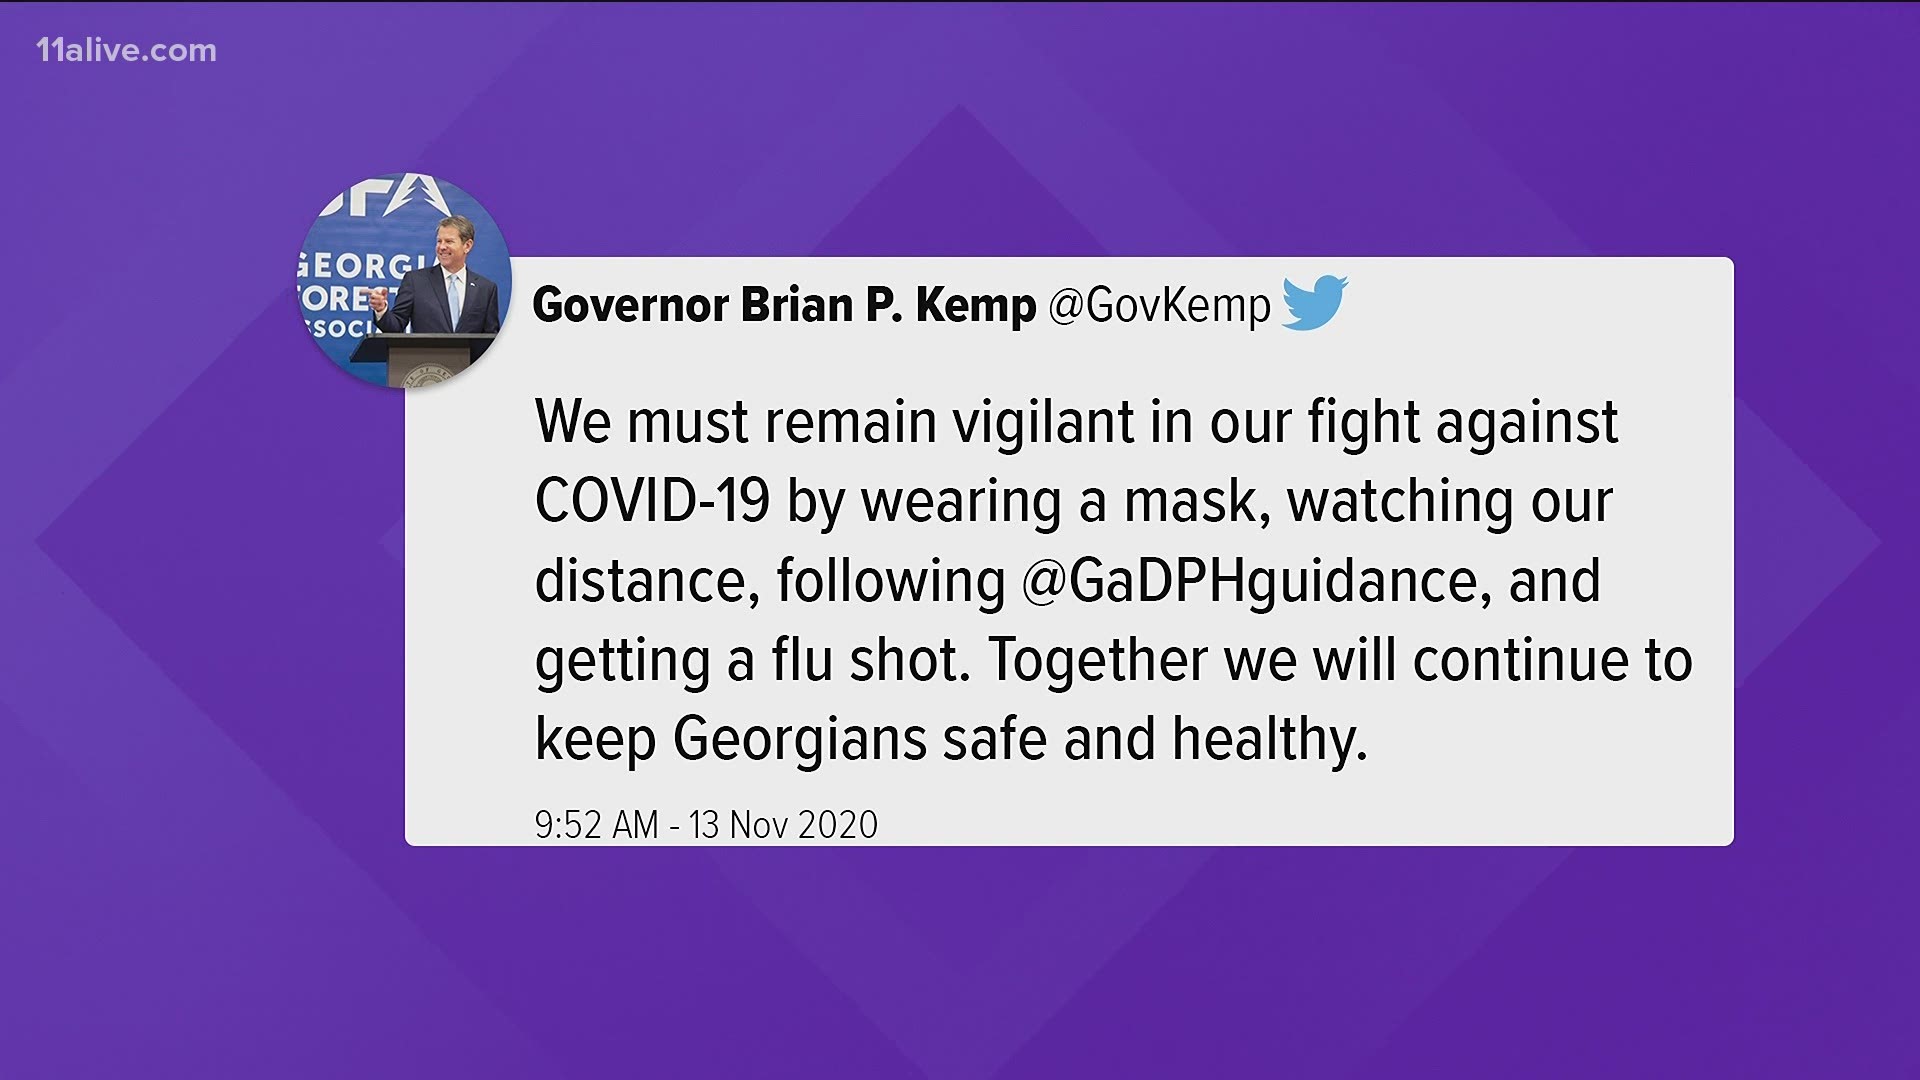 He tweeted for Georgians to "remain vigilant in our fight against COVID-19."